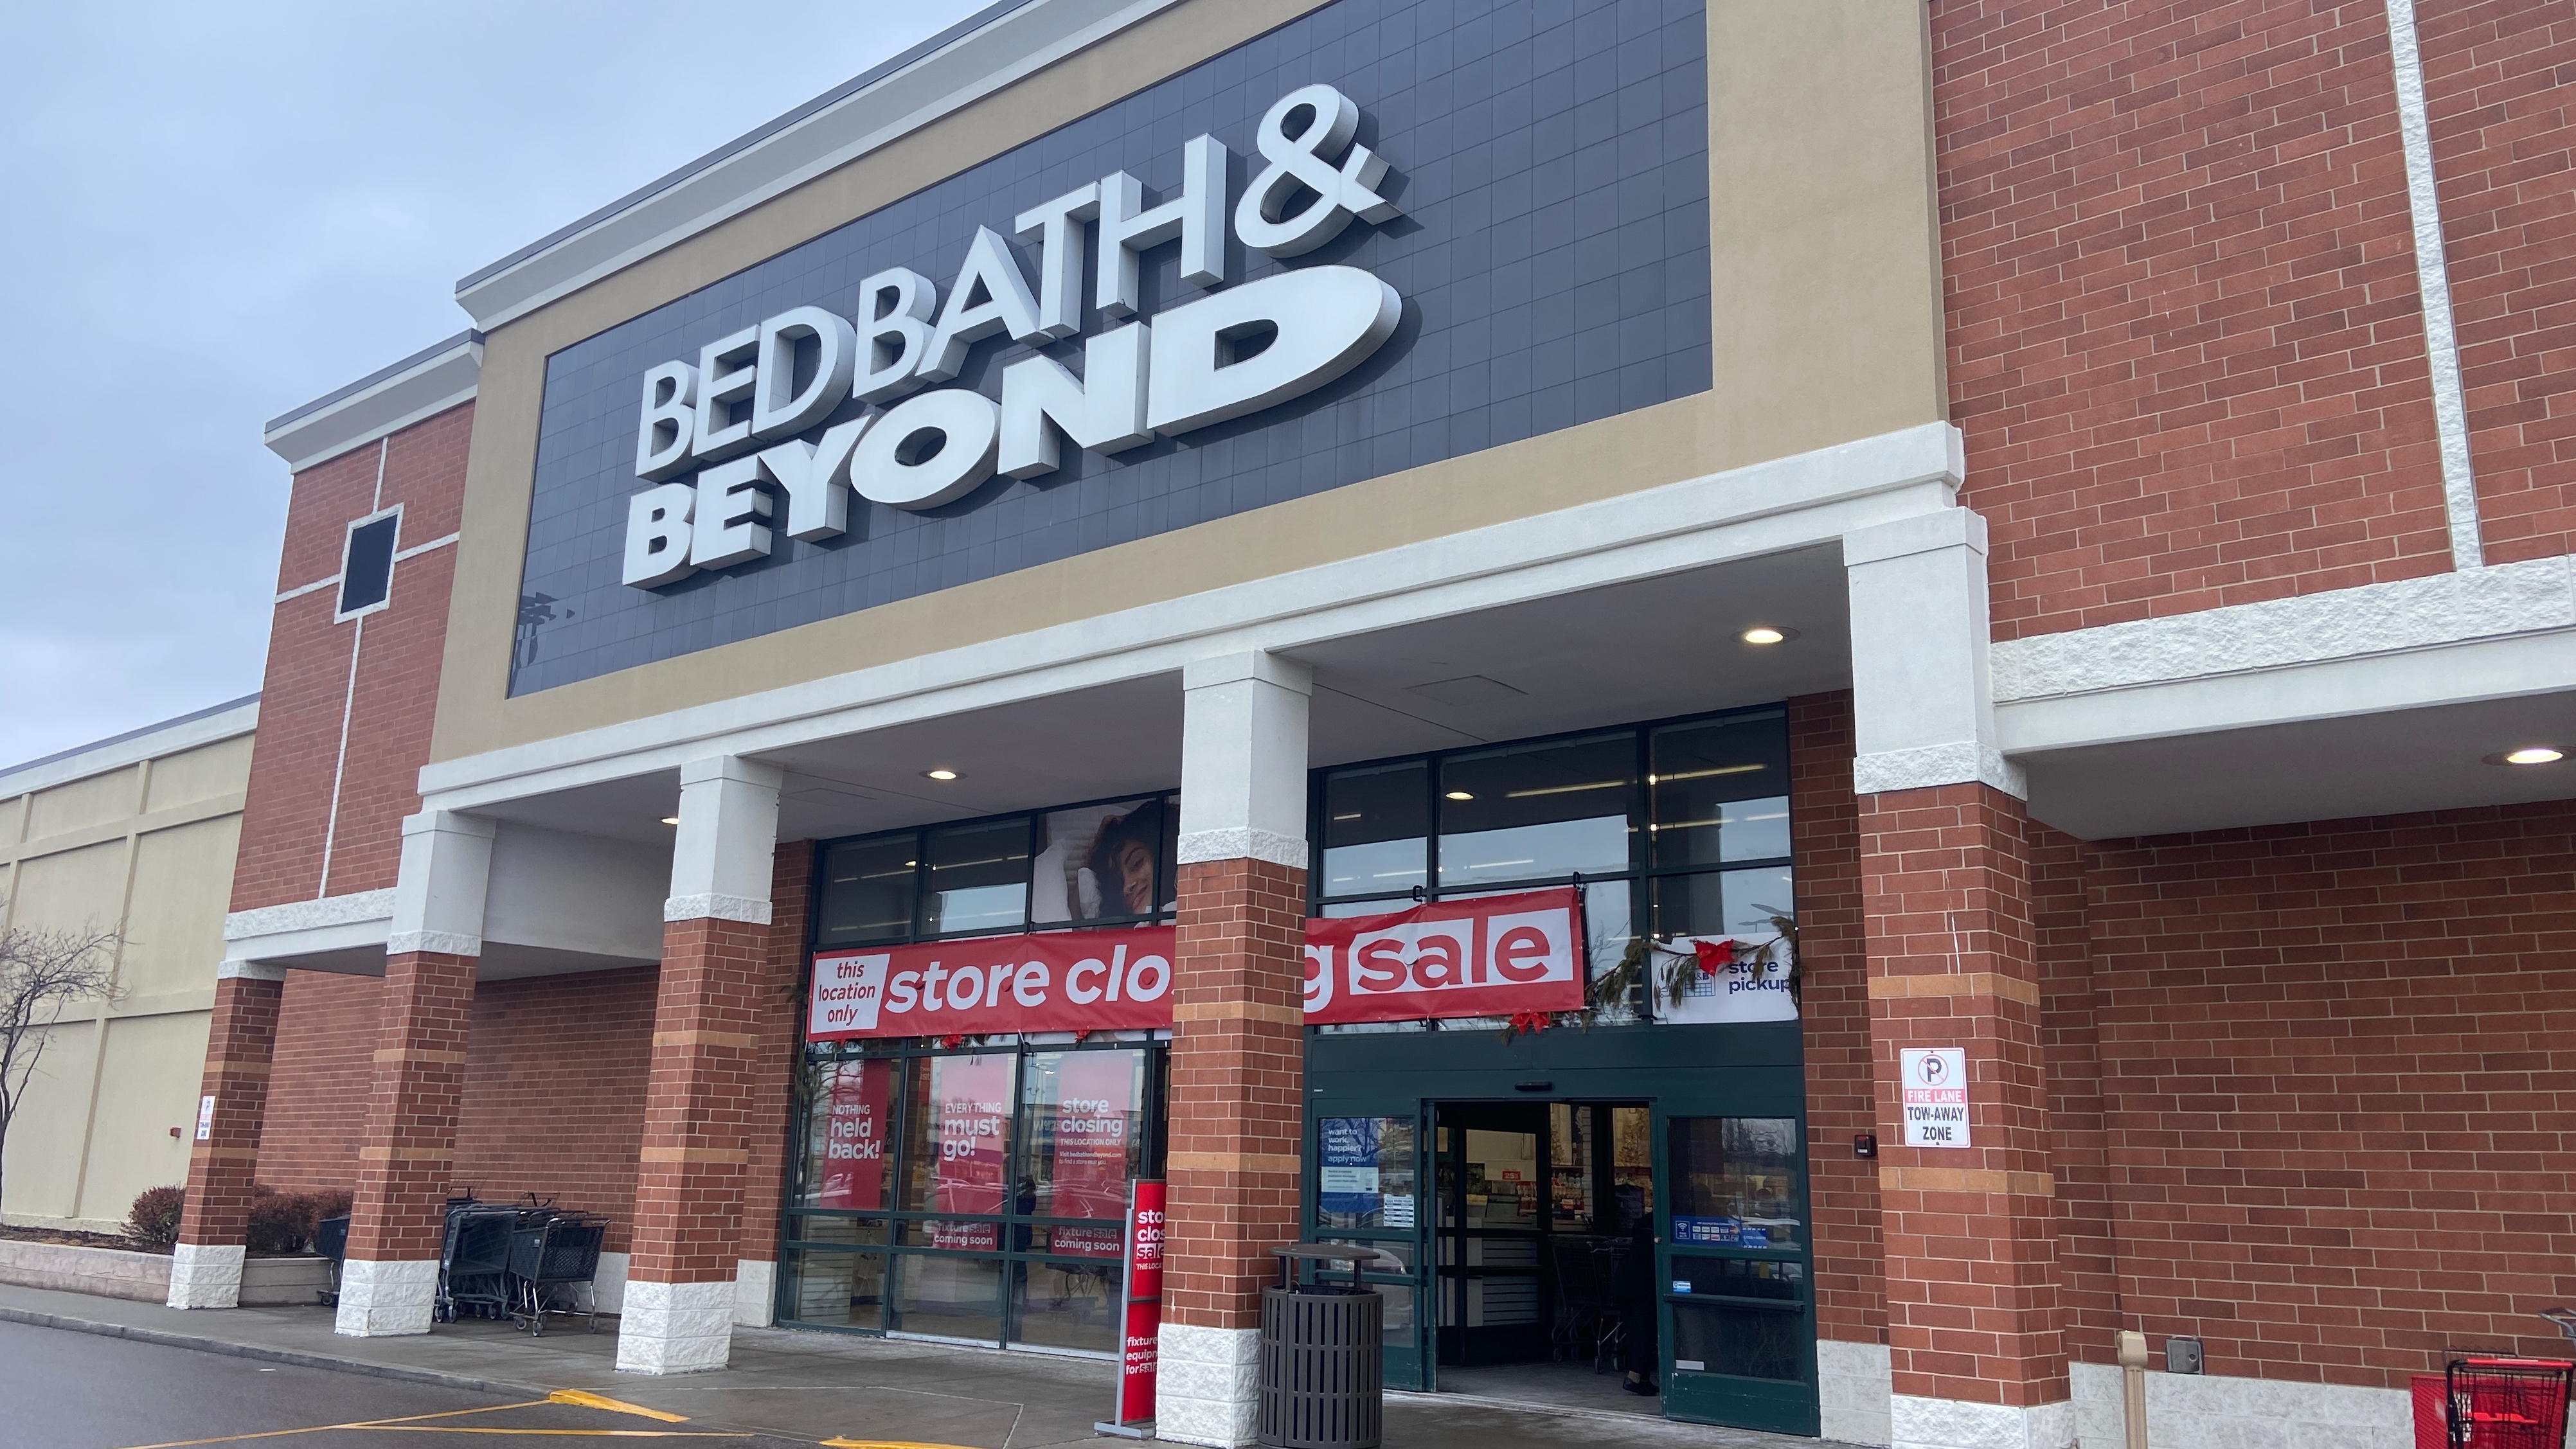 10 Bed, Bath & Beyond items to snag before the Bethlehem Township store  closes for good 